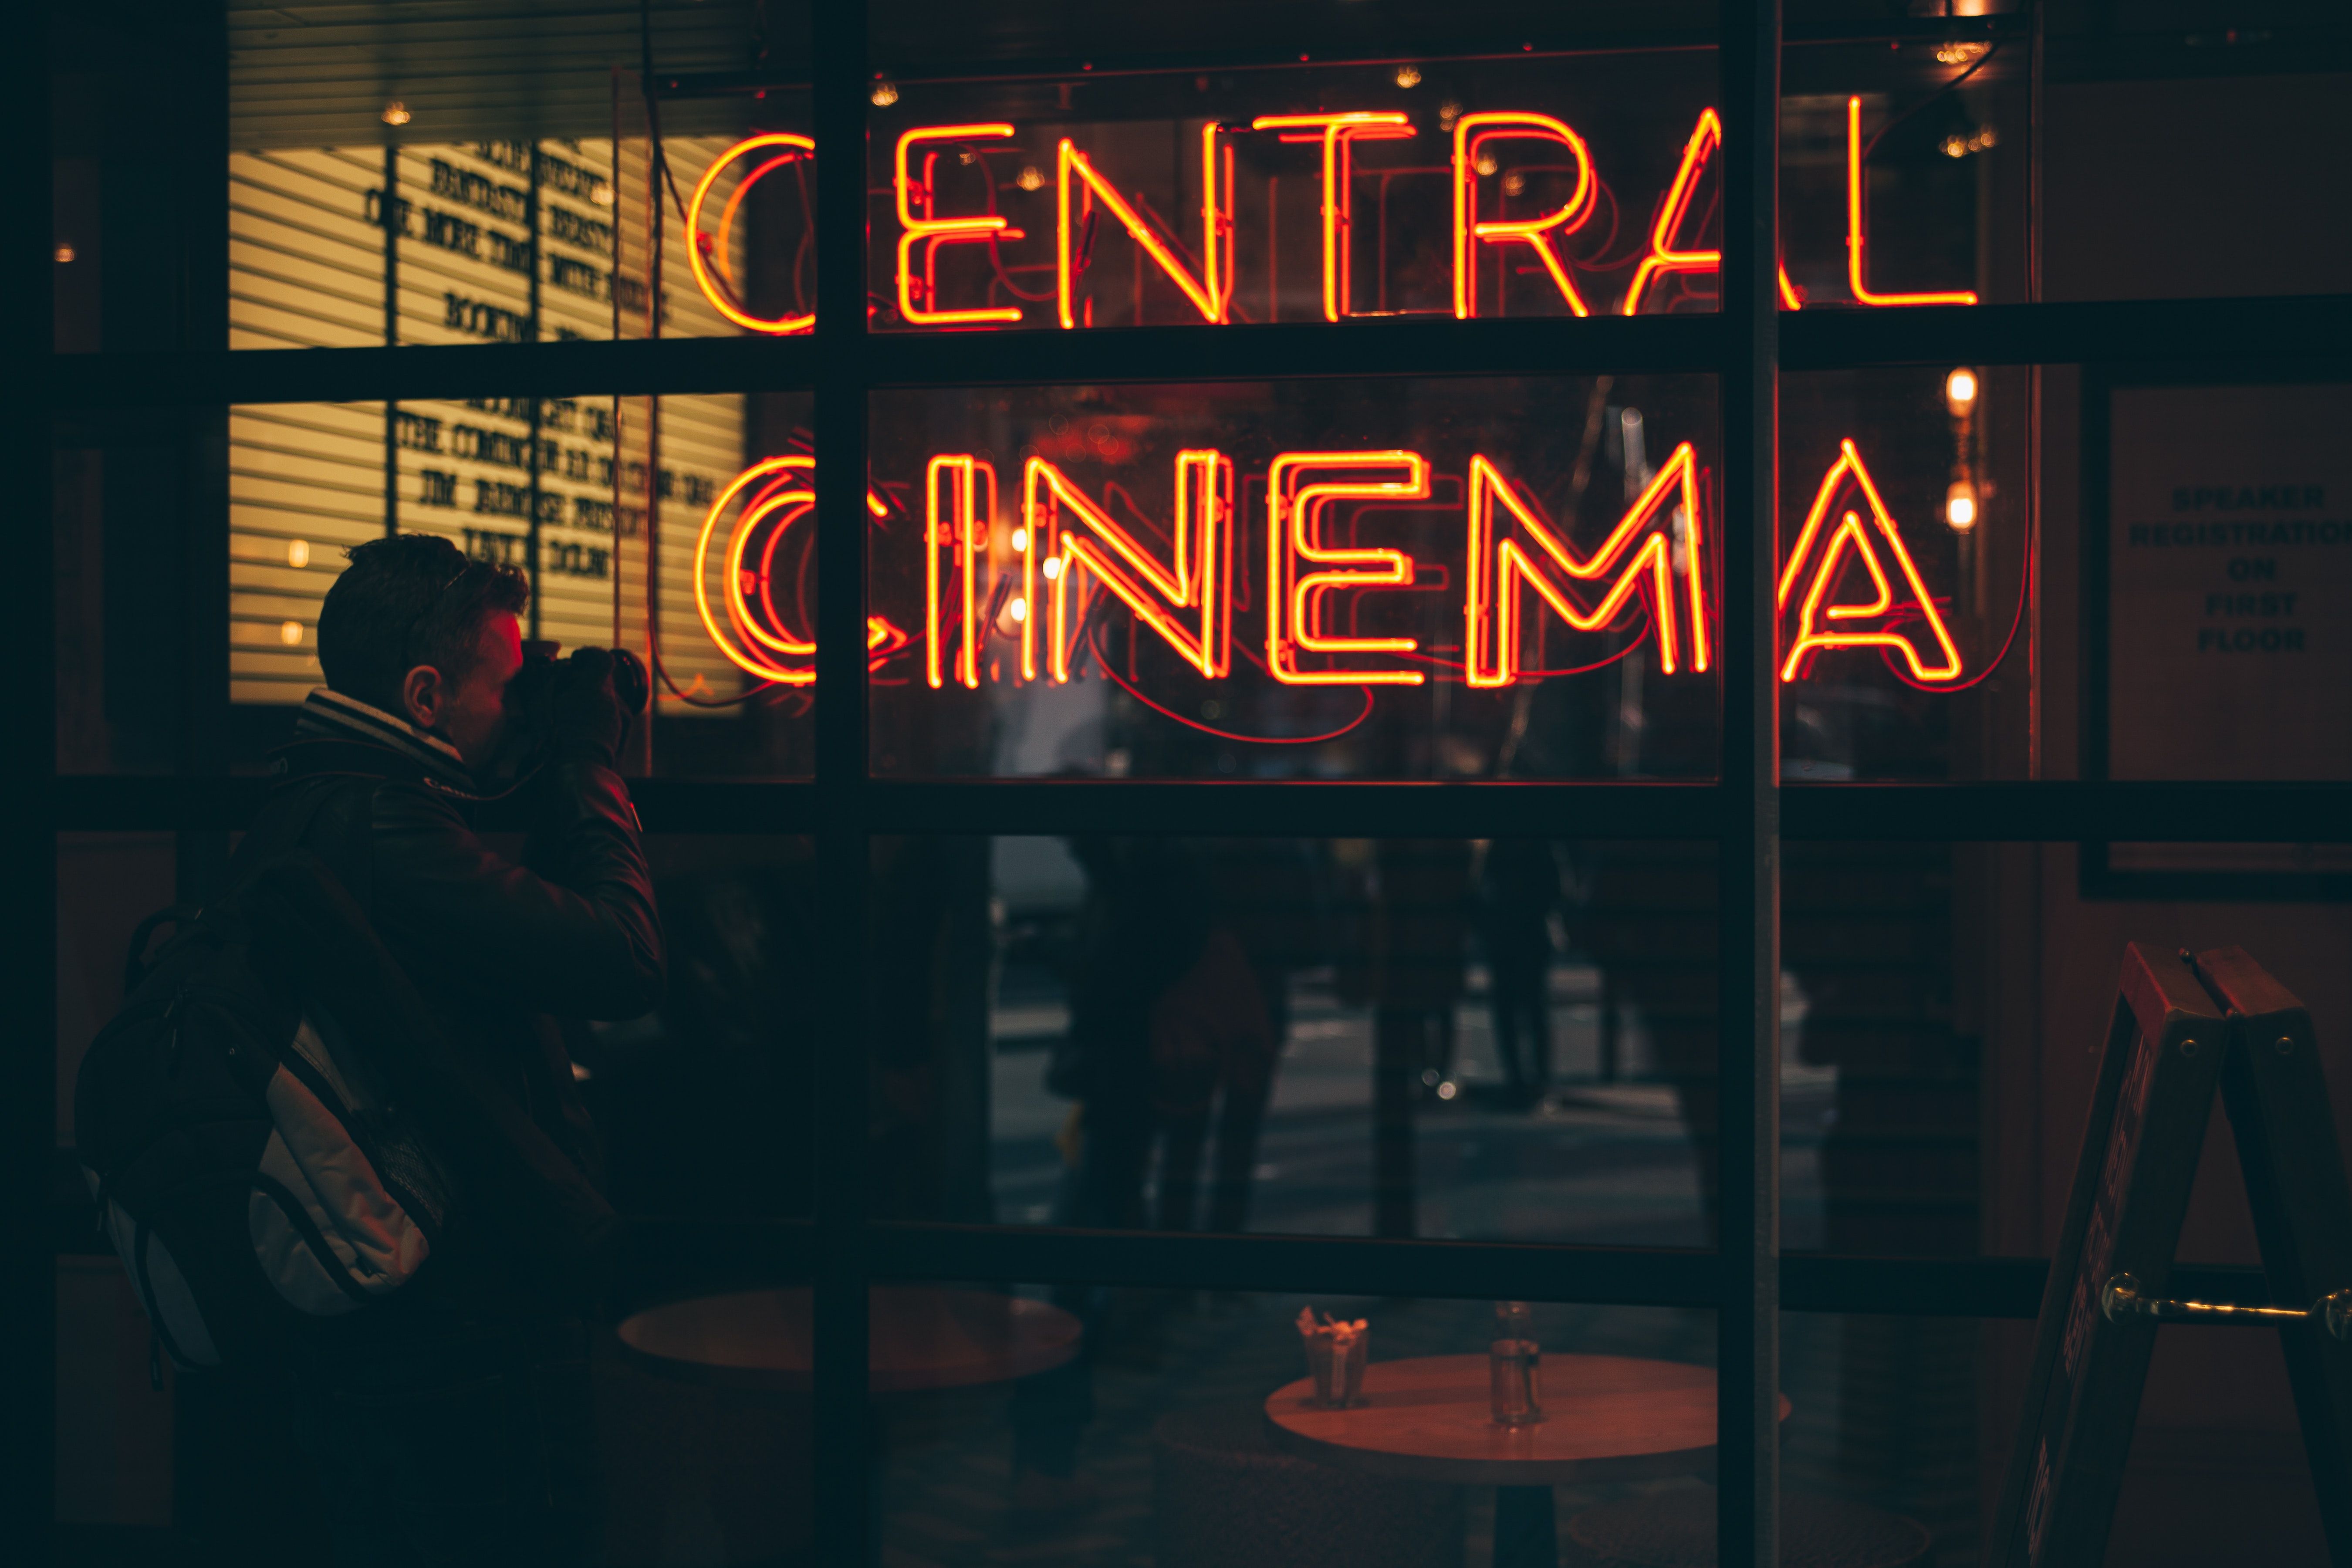 A man is standing in front of the central cinema - Neon orange